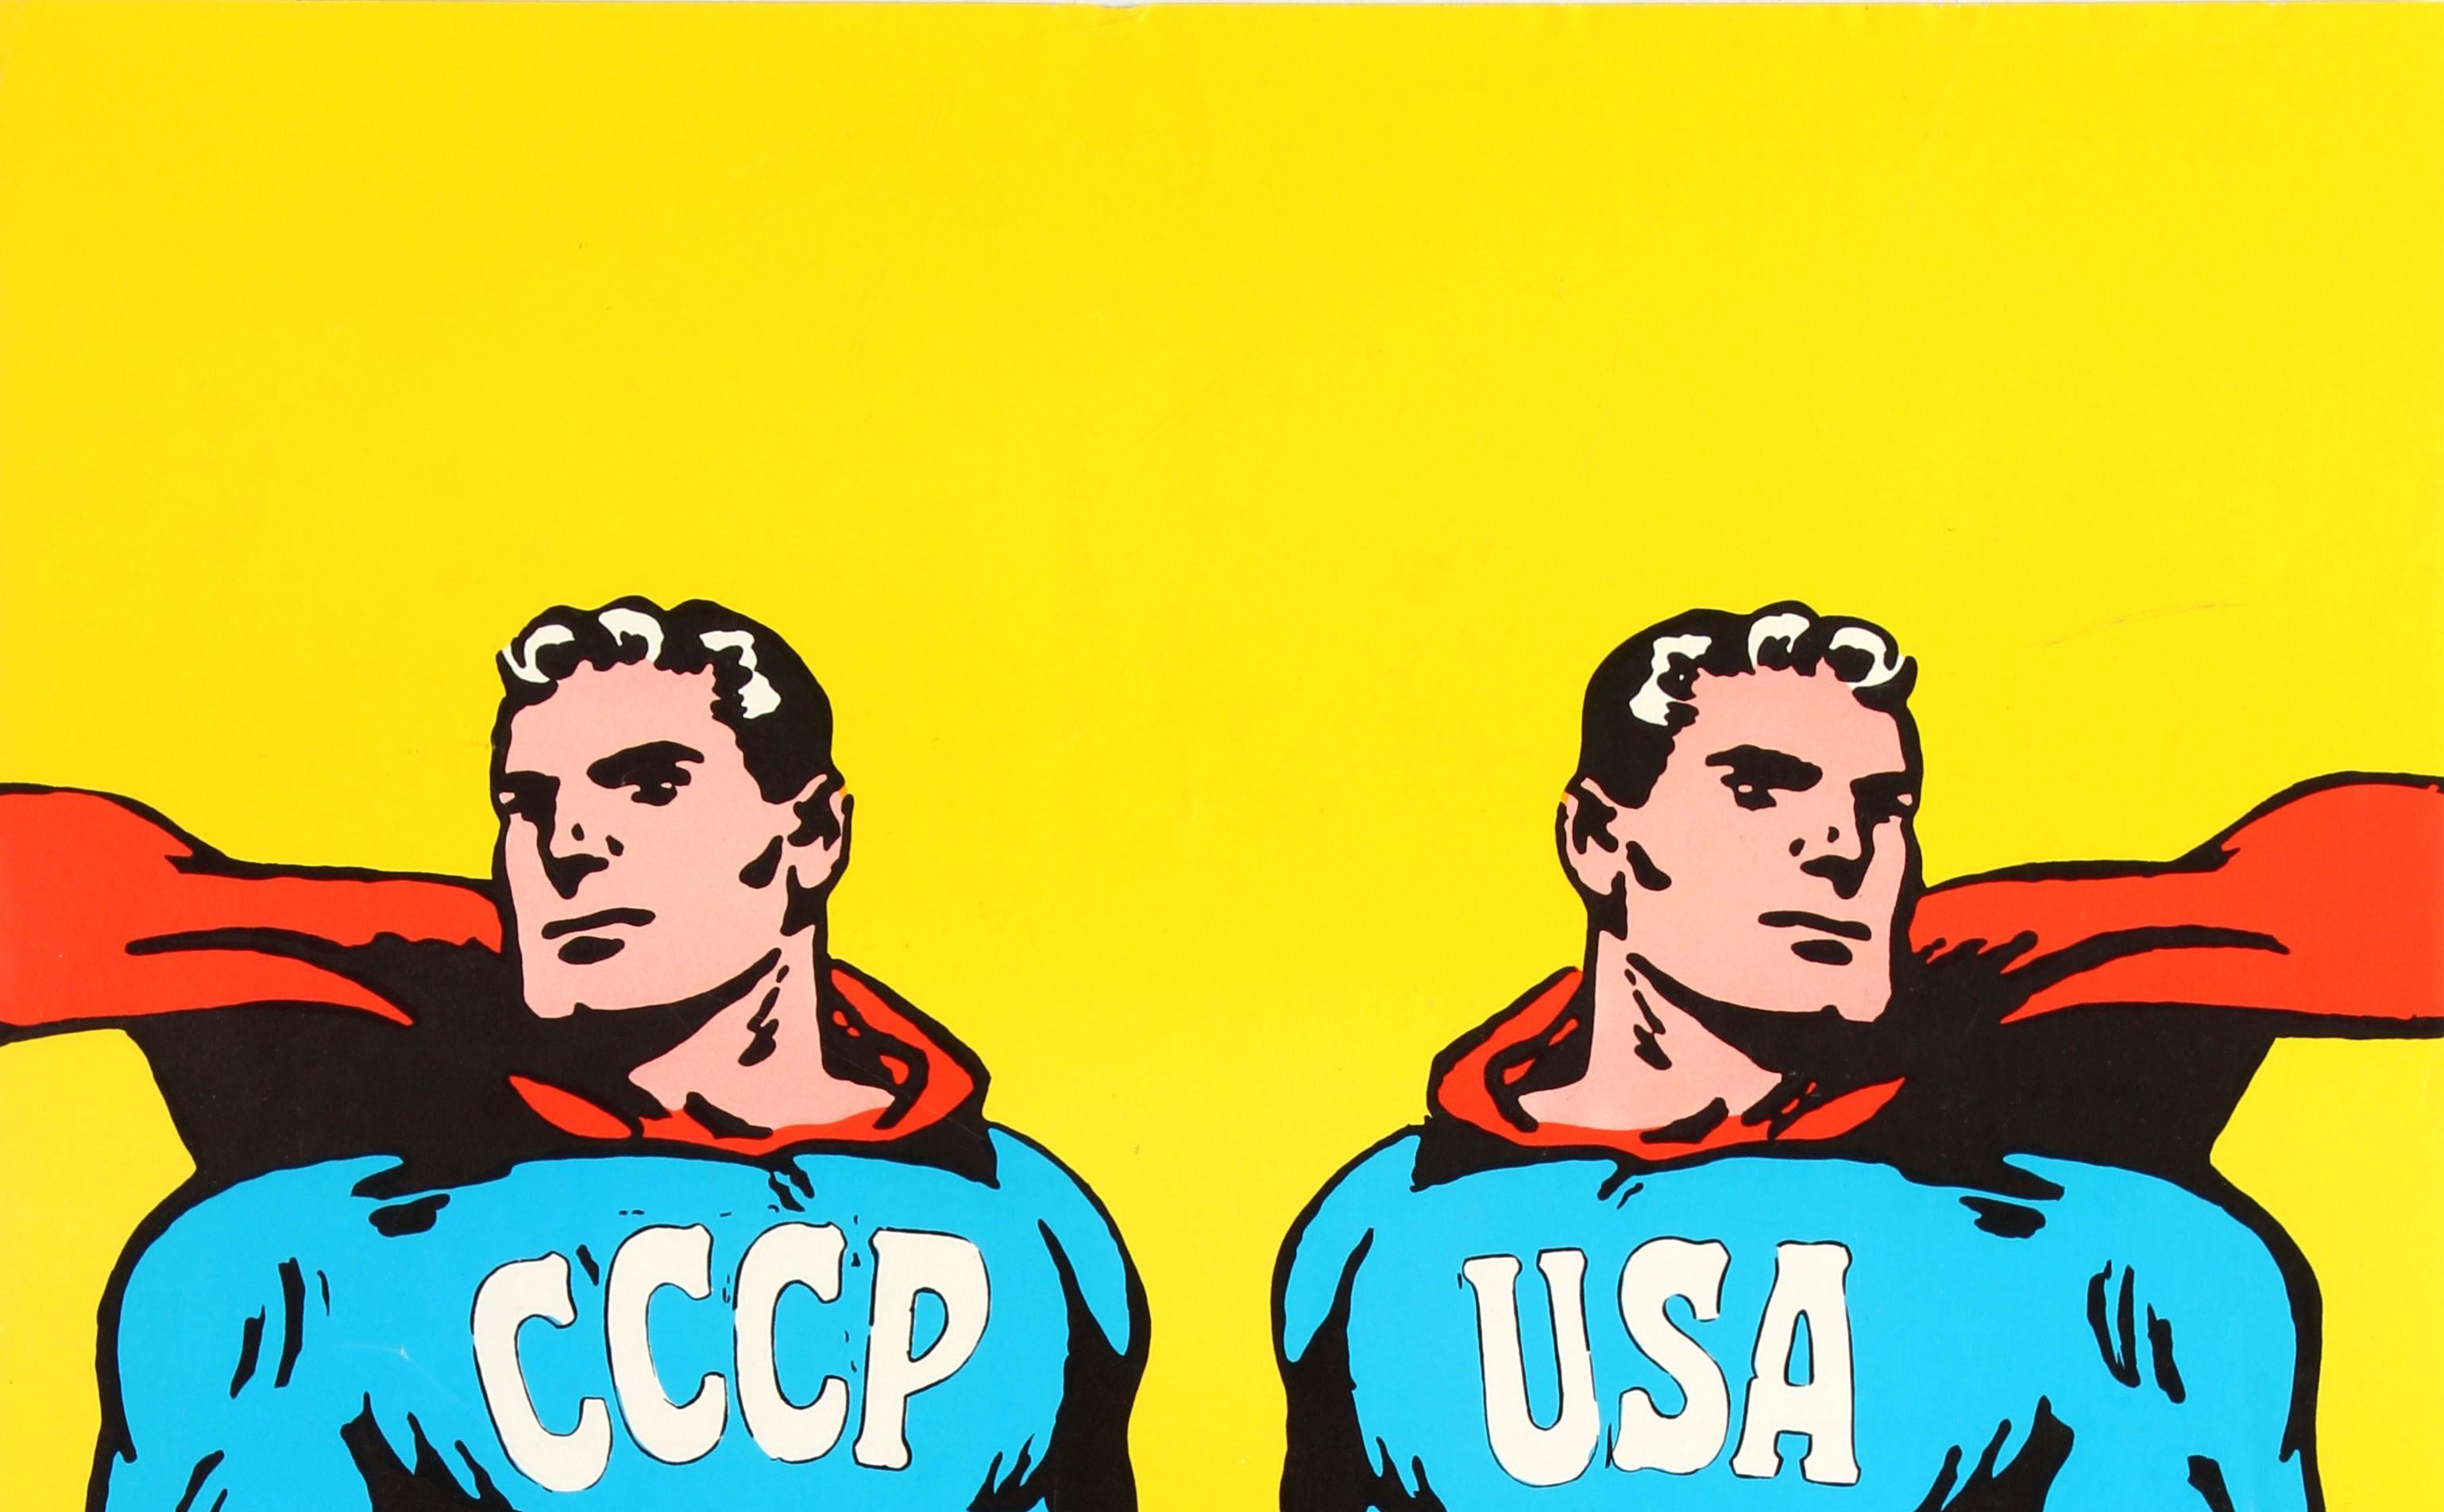 Original vintage Superman style poster - CCCP USA - by the renowned graphic designer Roman Cieslewicz (1930-1996) featuring a colourful image of mirror versions of the comic book superhero Superman as the Cold War rivals USSR (CCCP / Soviet Union)